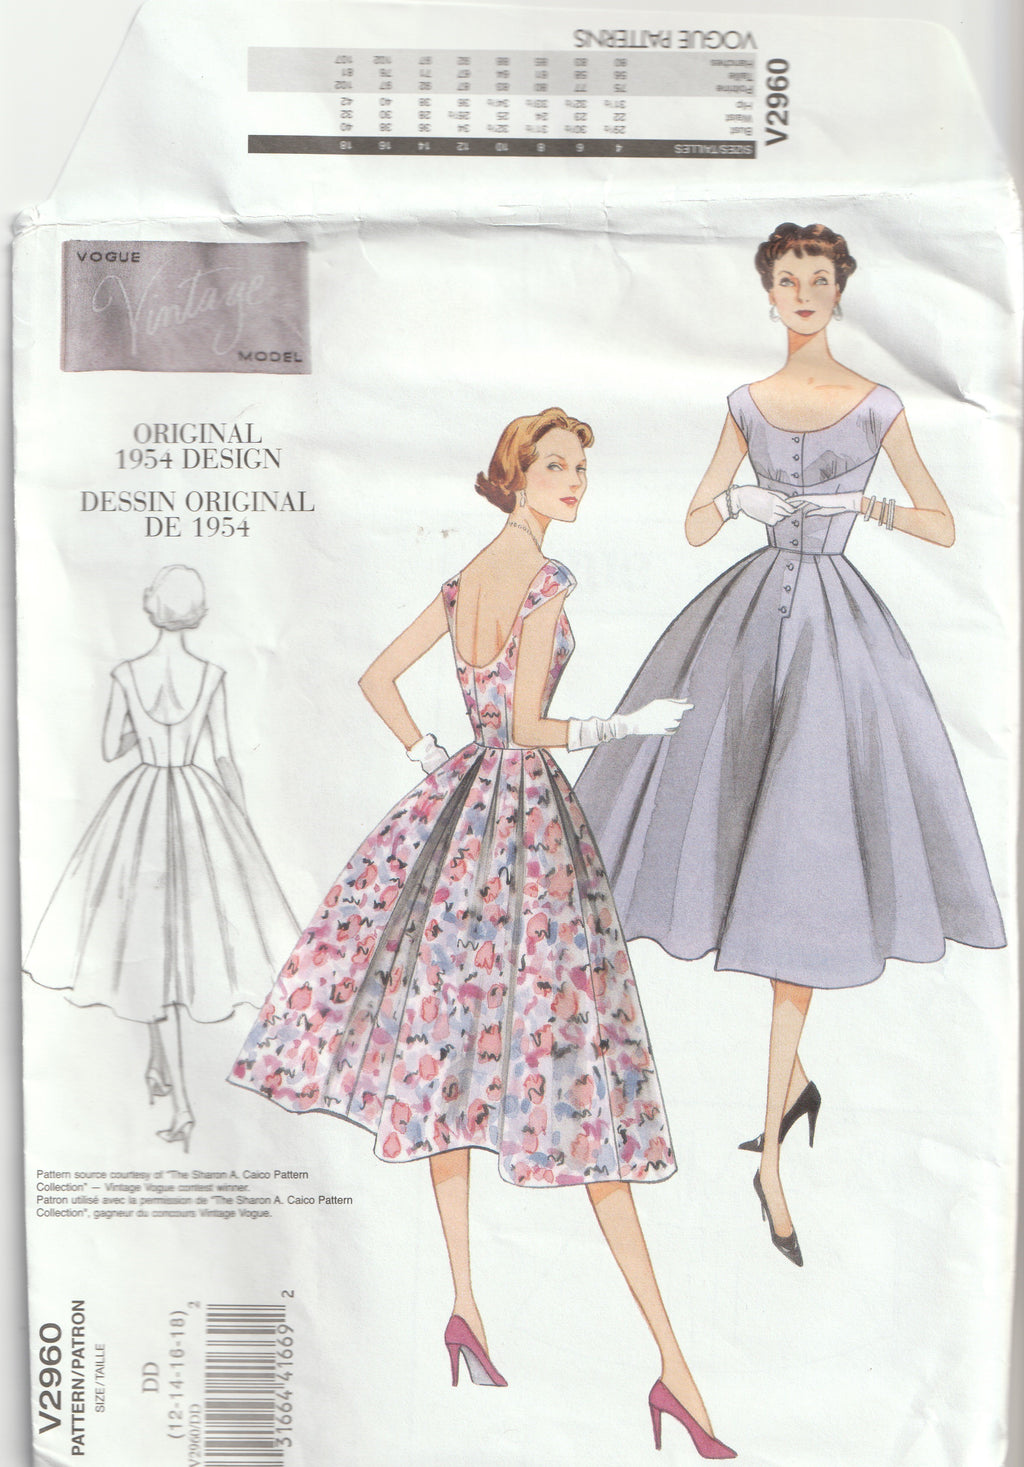 vintage pattern reproduction 1954 fit and flare dress with cap sleeves vogue 2960 1954 style